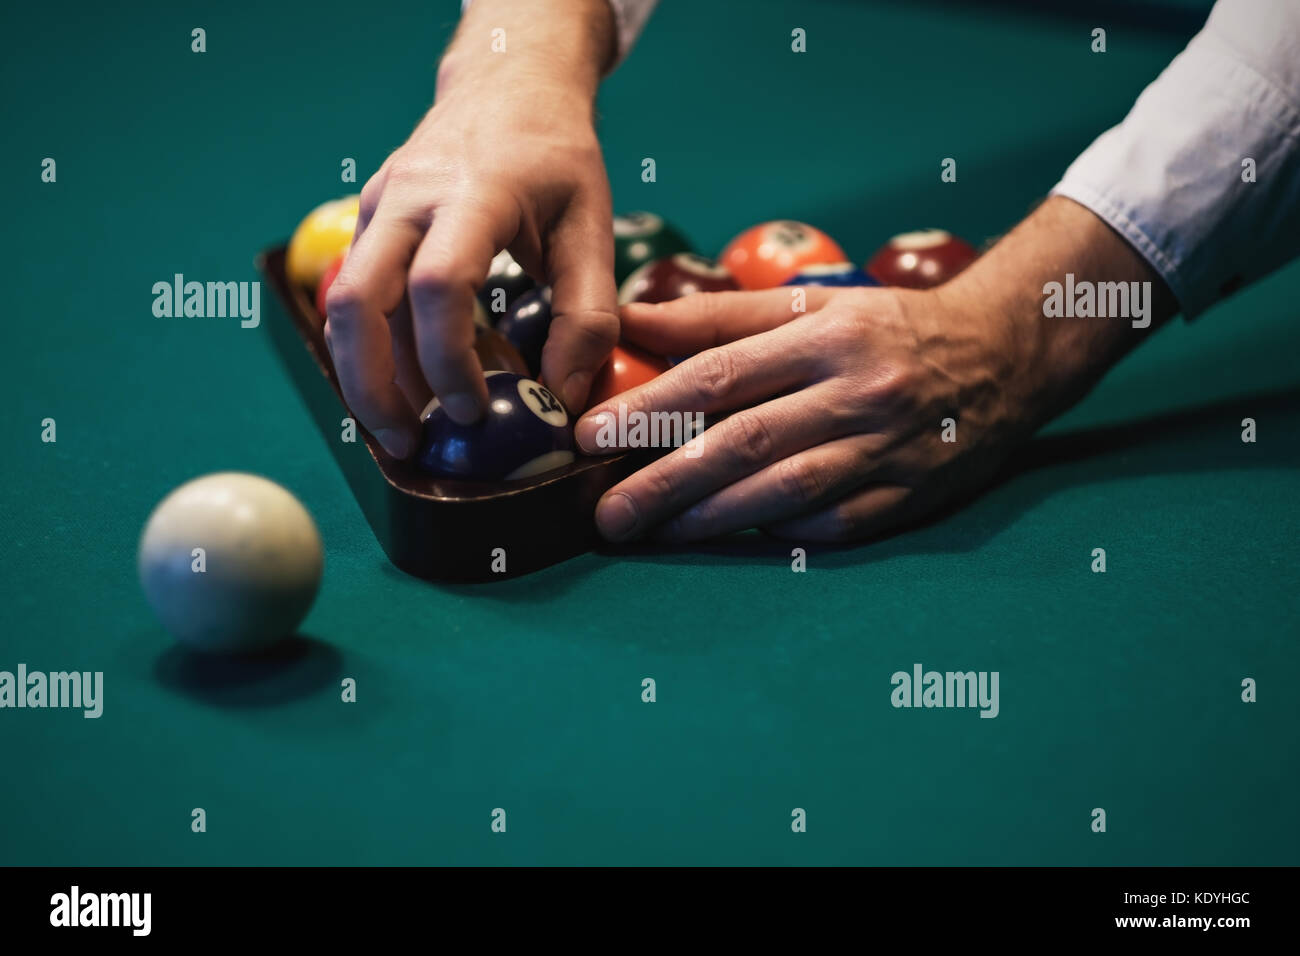 Playing billiard. Billiards balls on green billiards table. Caucasian player put ball inside. View from side. Stock Photo